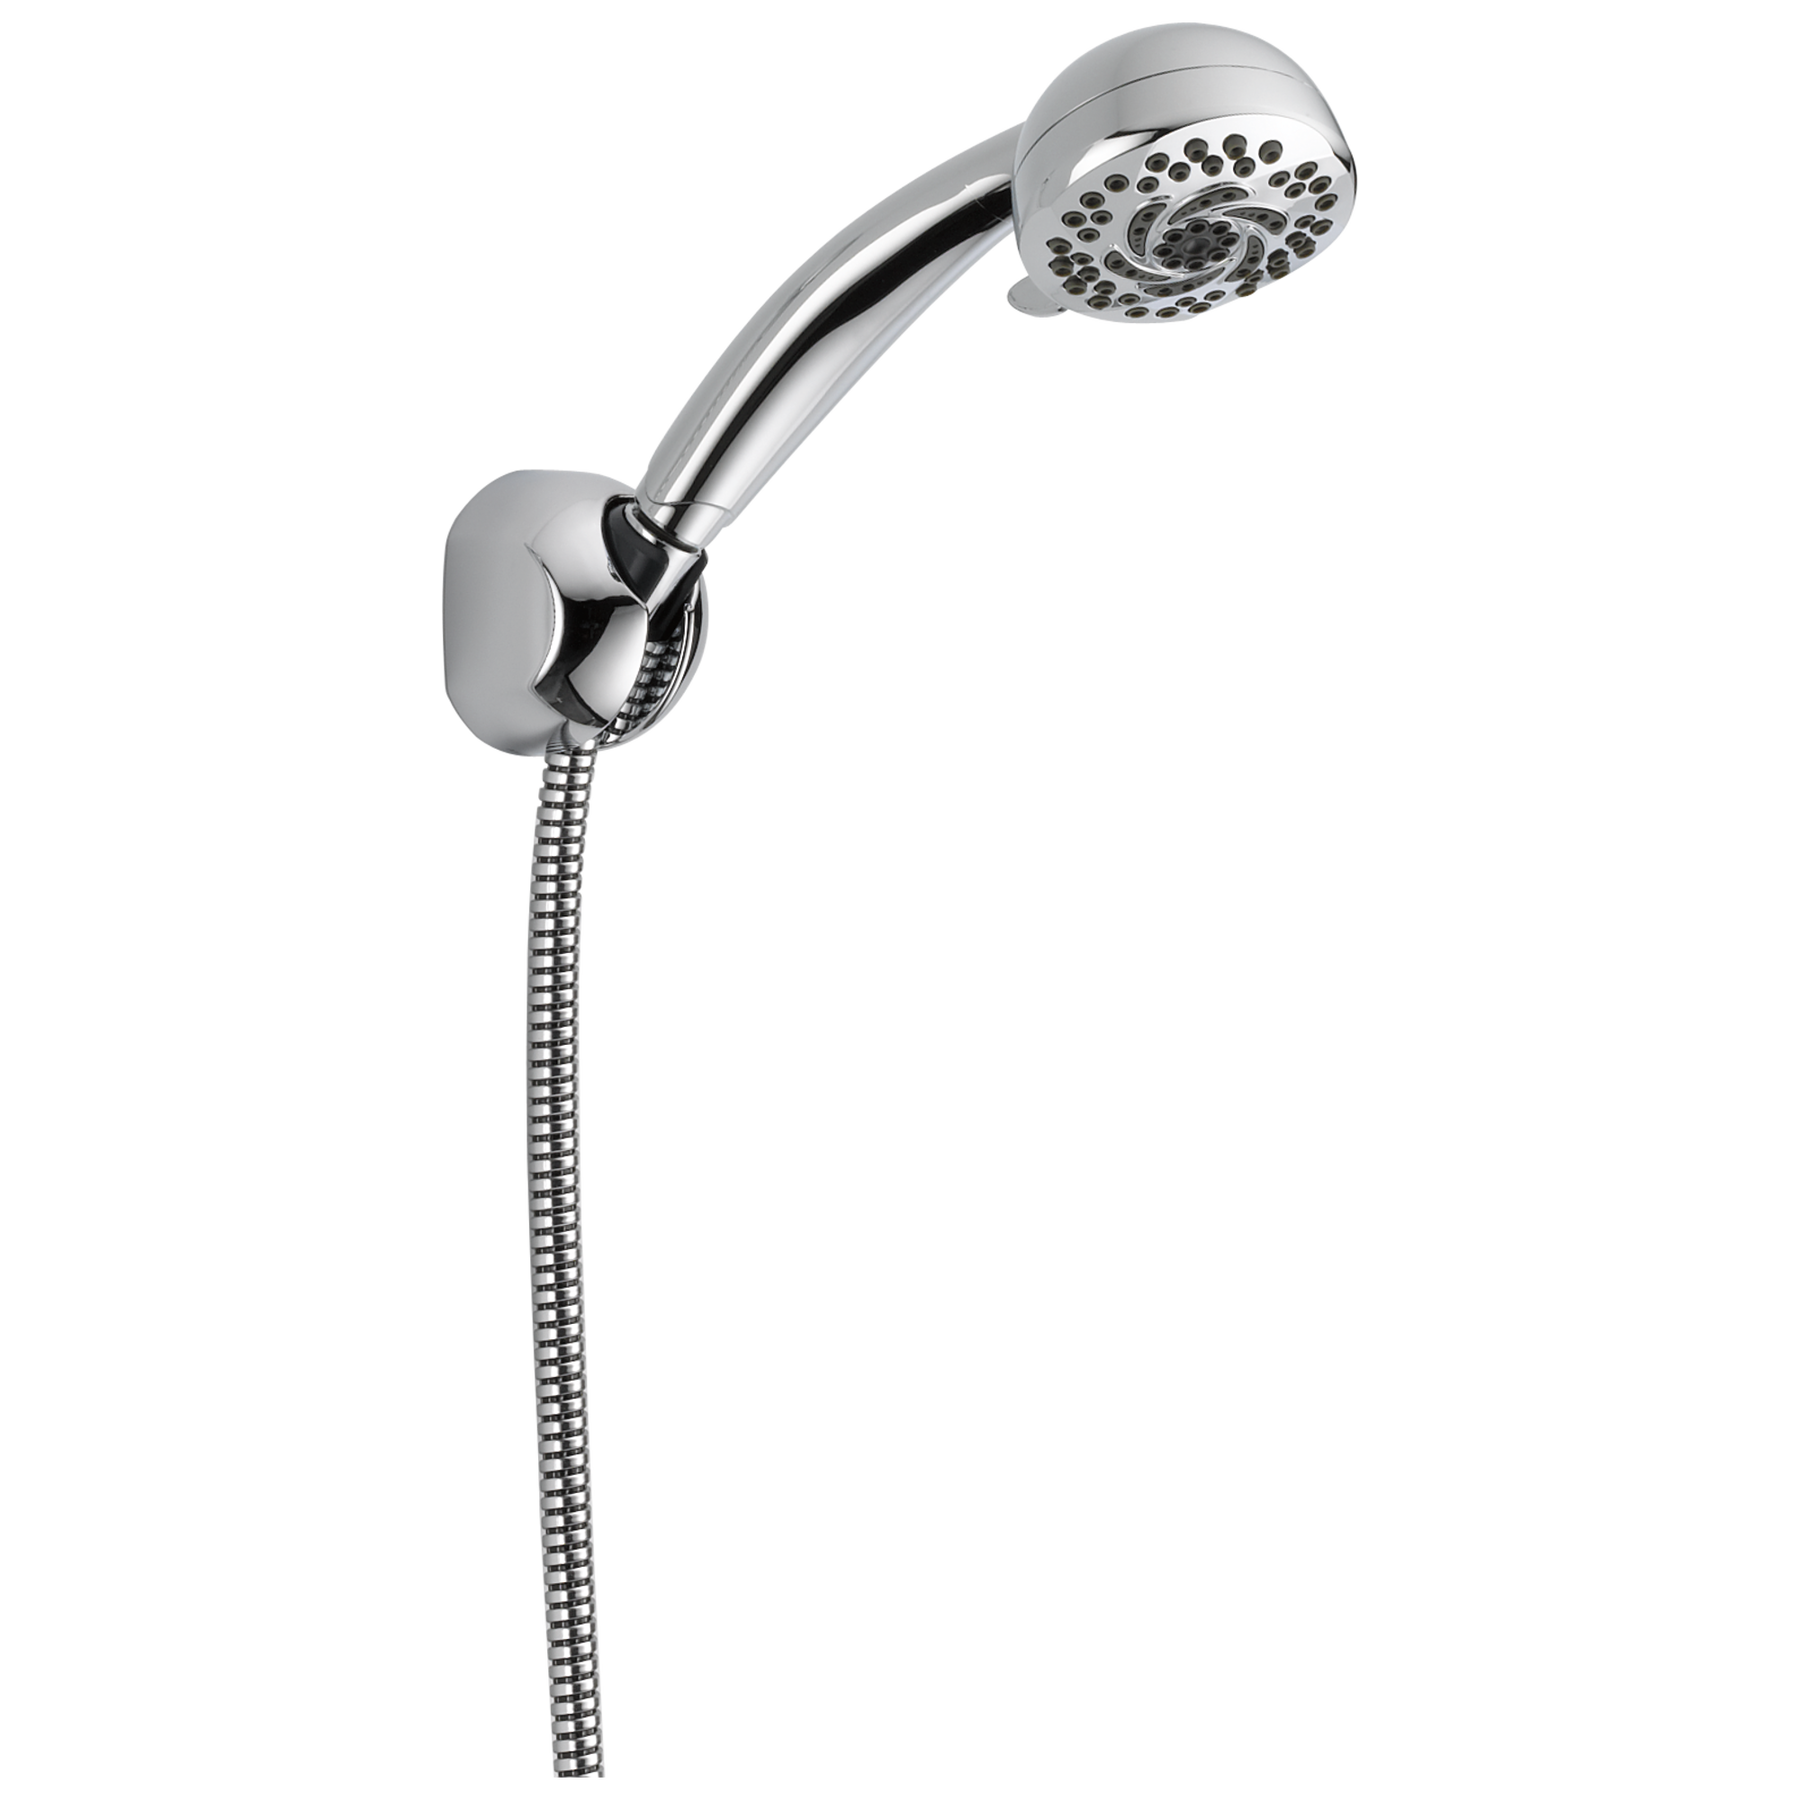 Adjustable Wall Mount for Hand Shower in Chrome U4005-PK